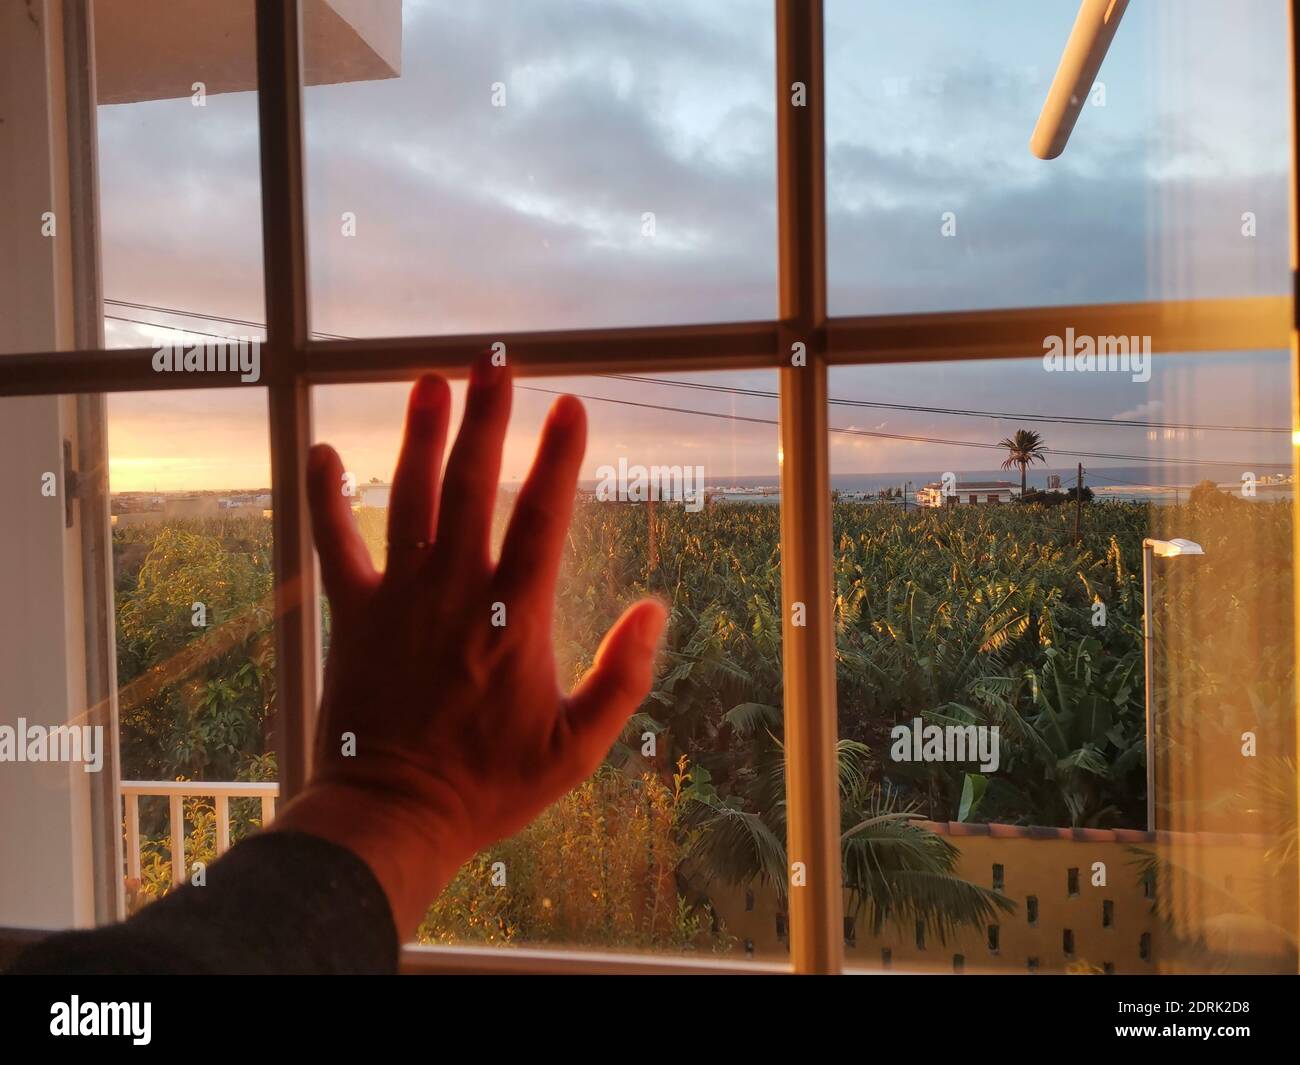 Hand of man touch the transparent glass of the window at home looking the outdoor view - concept of locked without freedom - quarantine for coronaviru Stock Photo